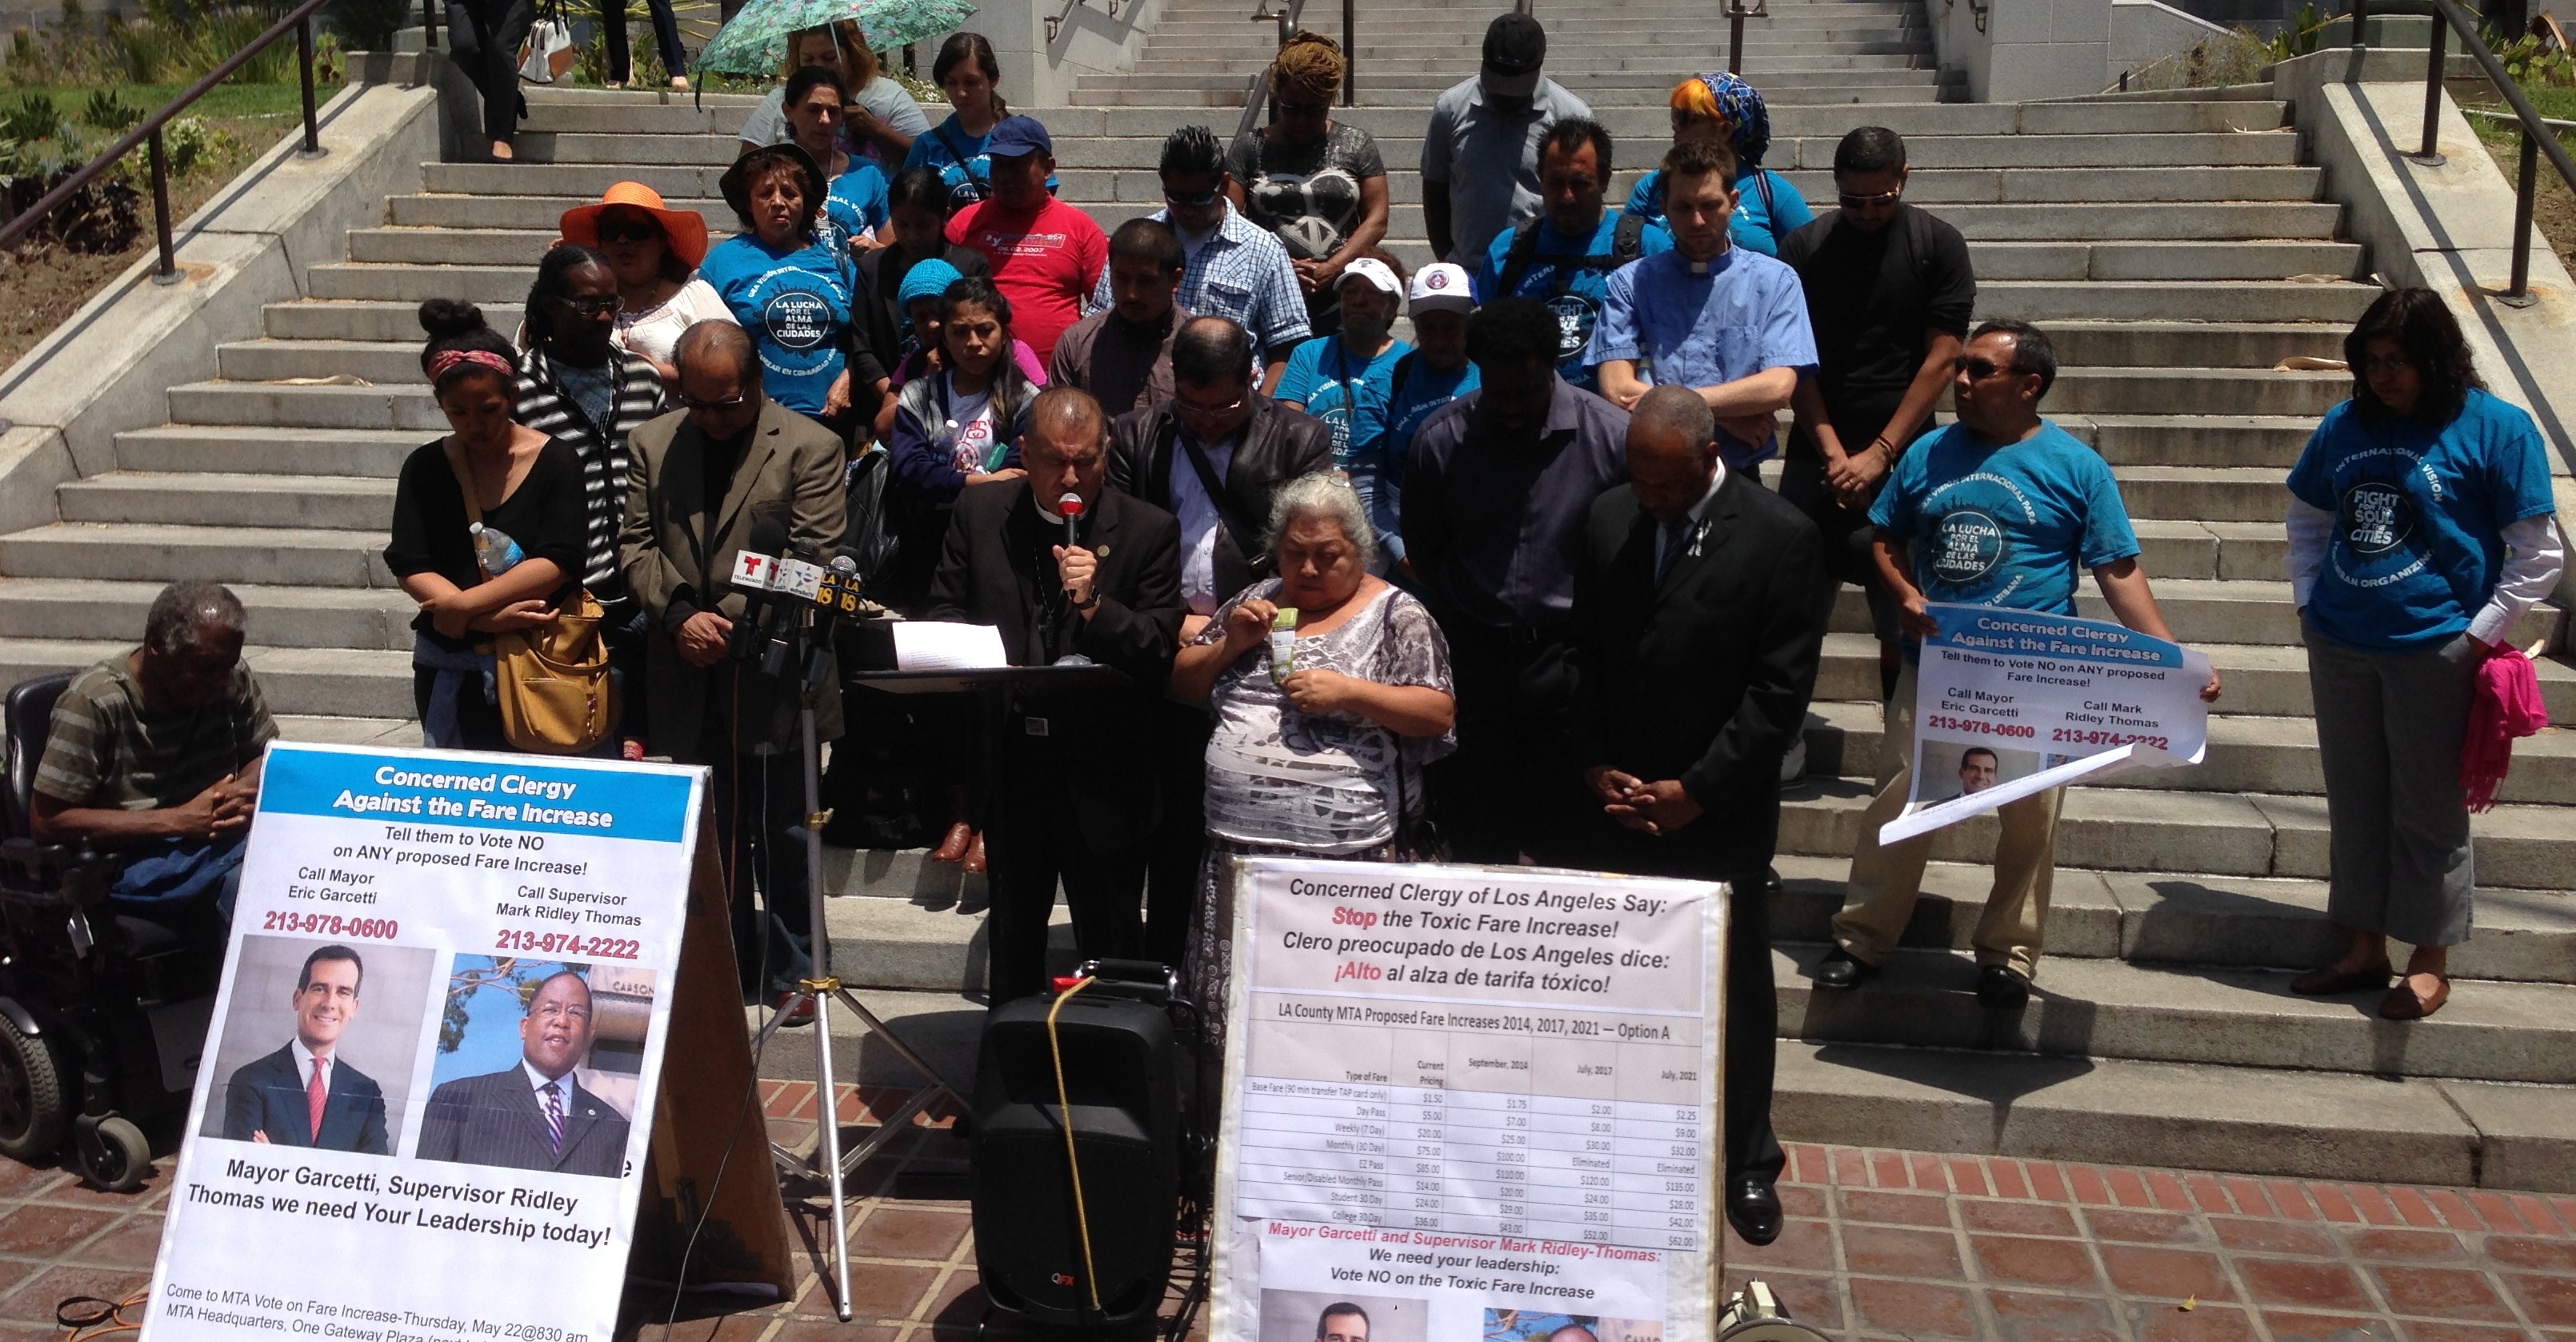 Bishop Juan Carlos Mendez, of Churches for Action, prays for Metro board officials to  have hearts of compassion in opposition to Metro's proposed fare increase. Photo: Joe Linton/Streetsblog LA